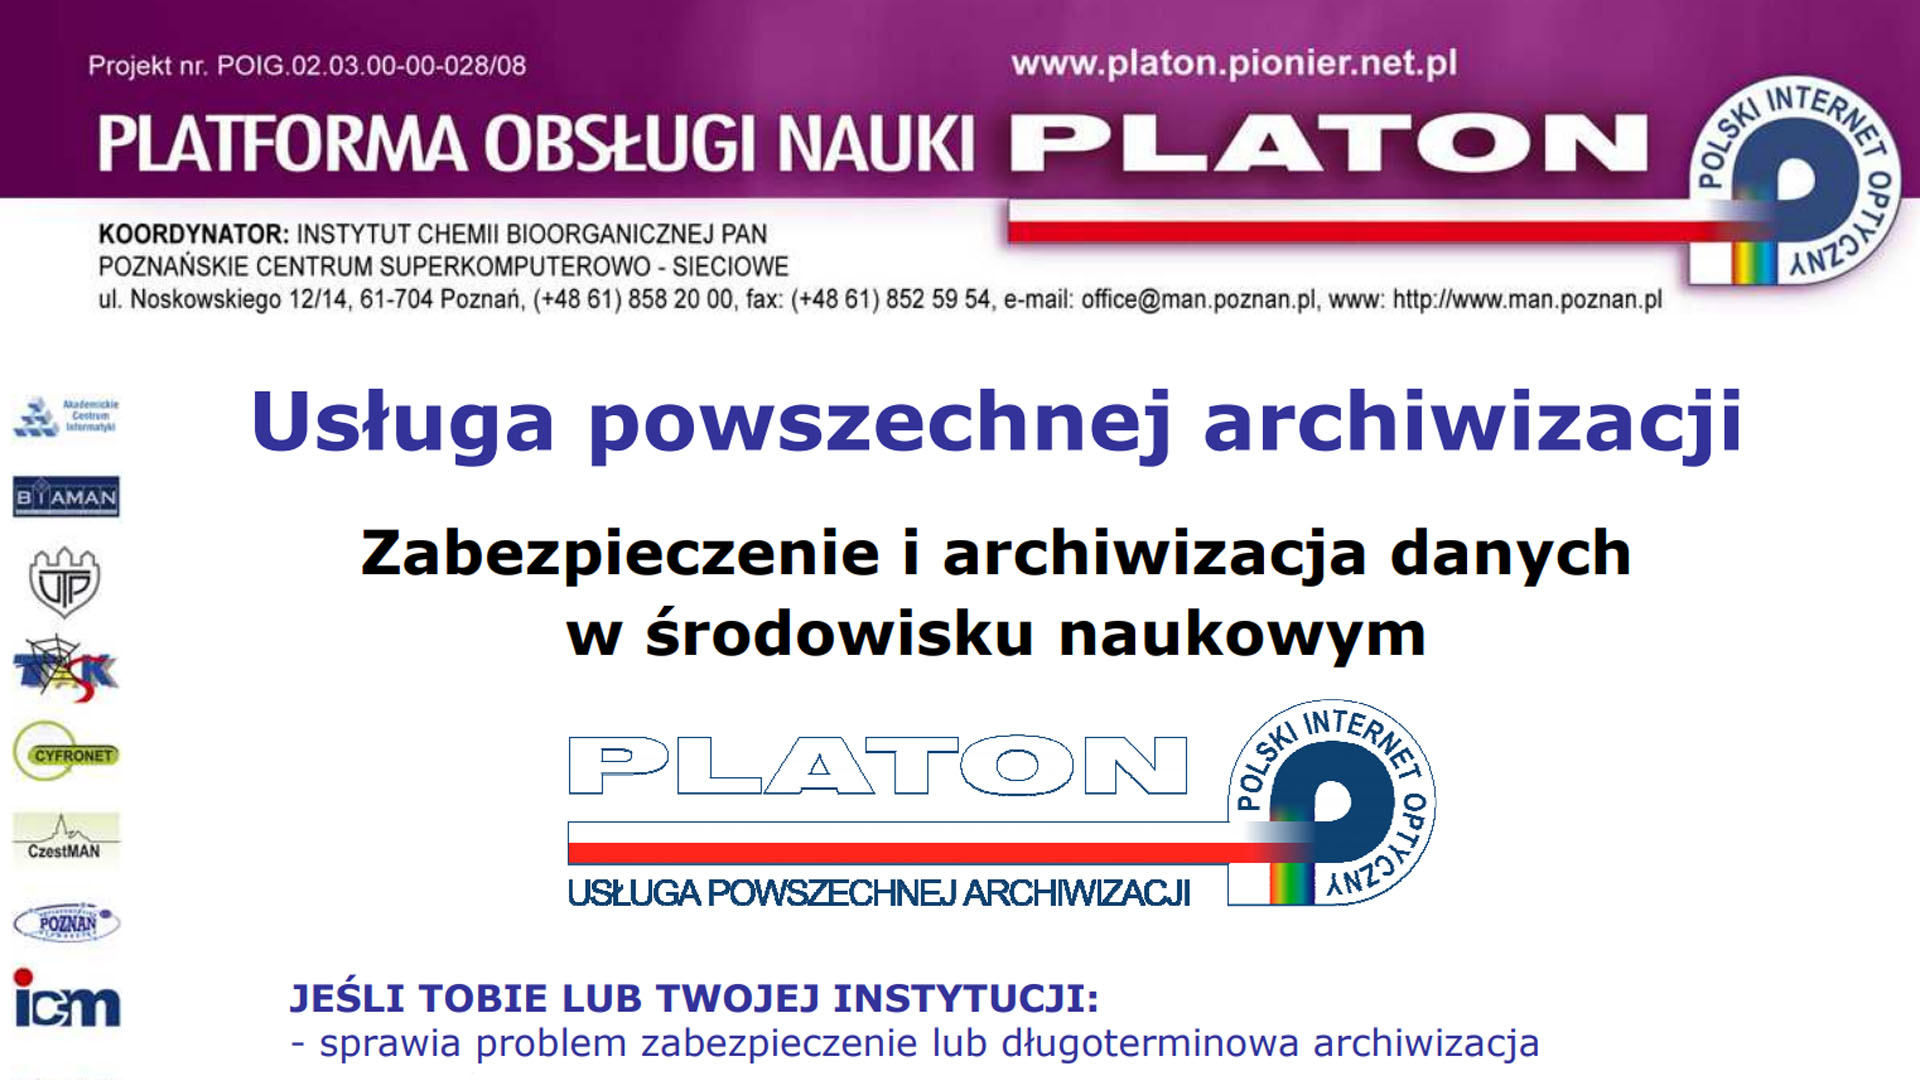 Workshop on archiving service all over Poland